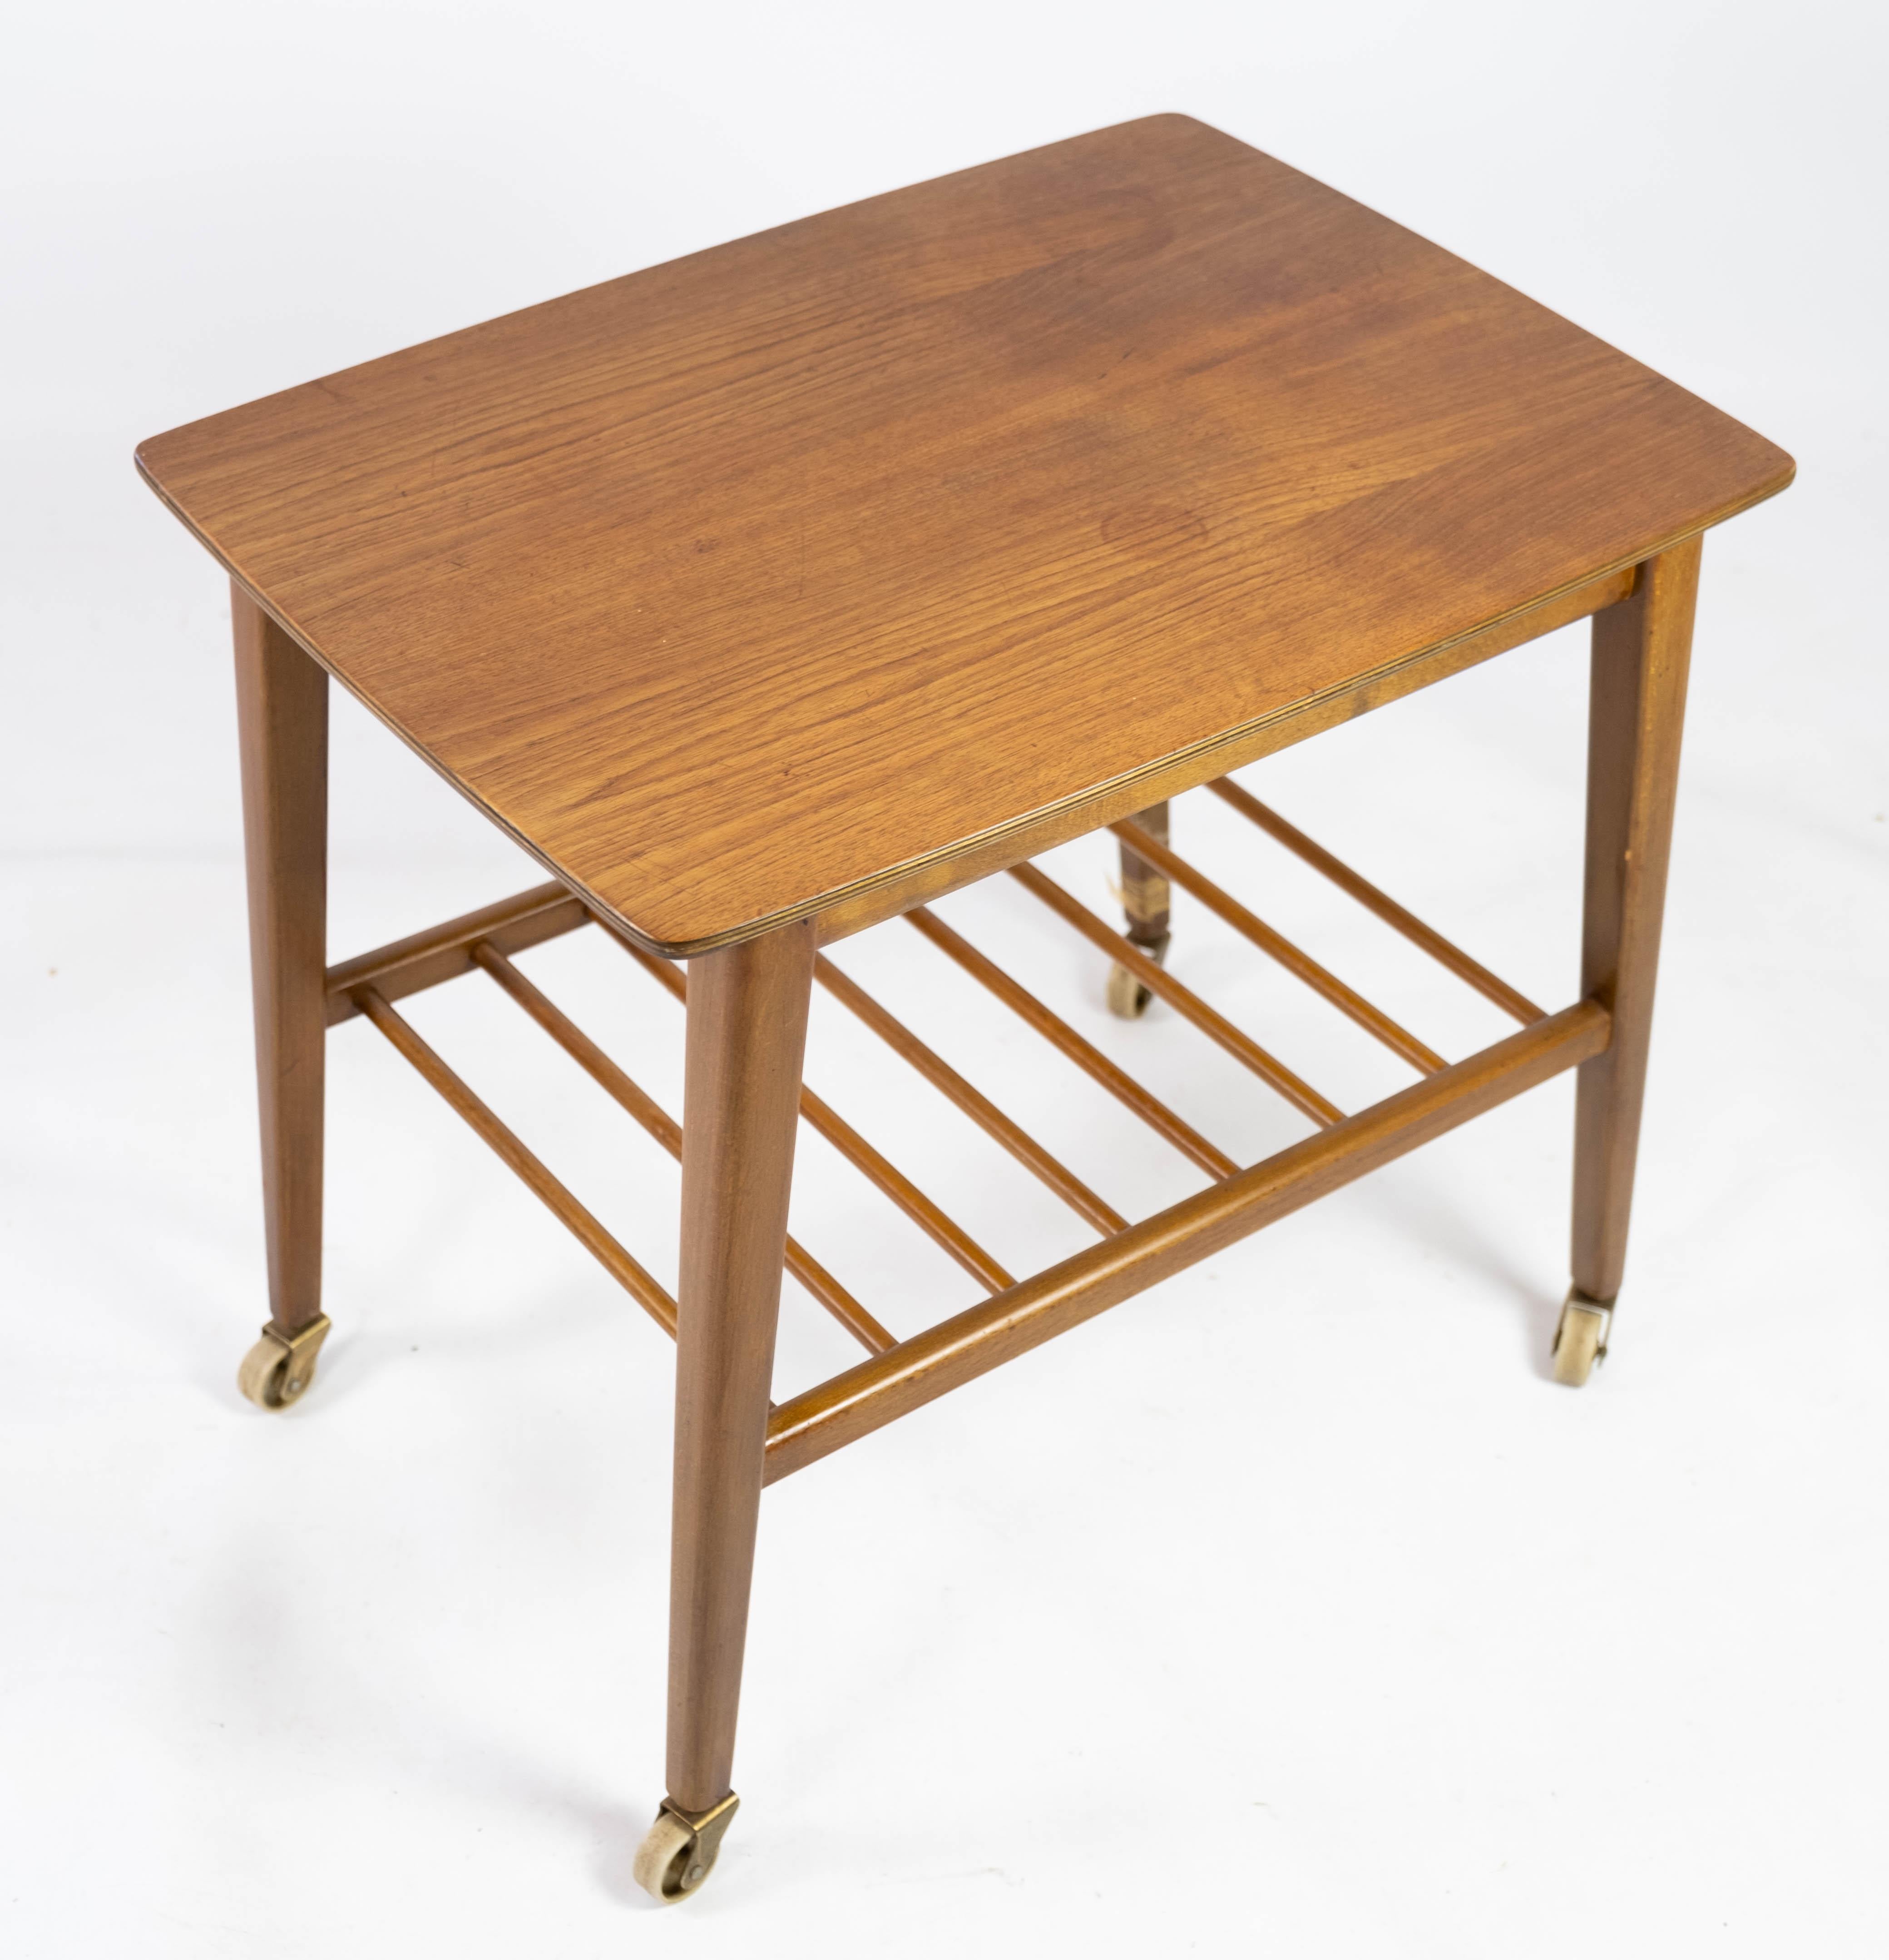 This Danish-designed side table from the 1960s combines functionality with sleek aesthetics. Crafted from teak, a wood renowned for its durability and warmth, this piece exudes timeless elegance.

Featuring a convenient shelf for extra storage and